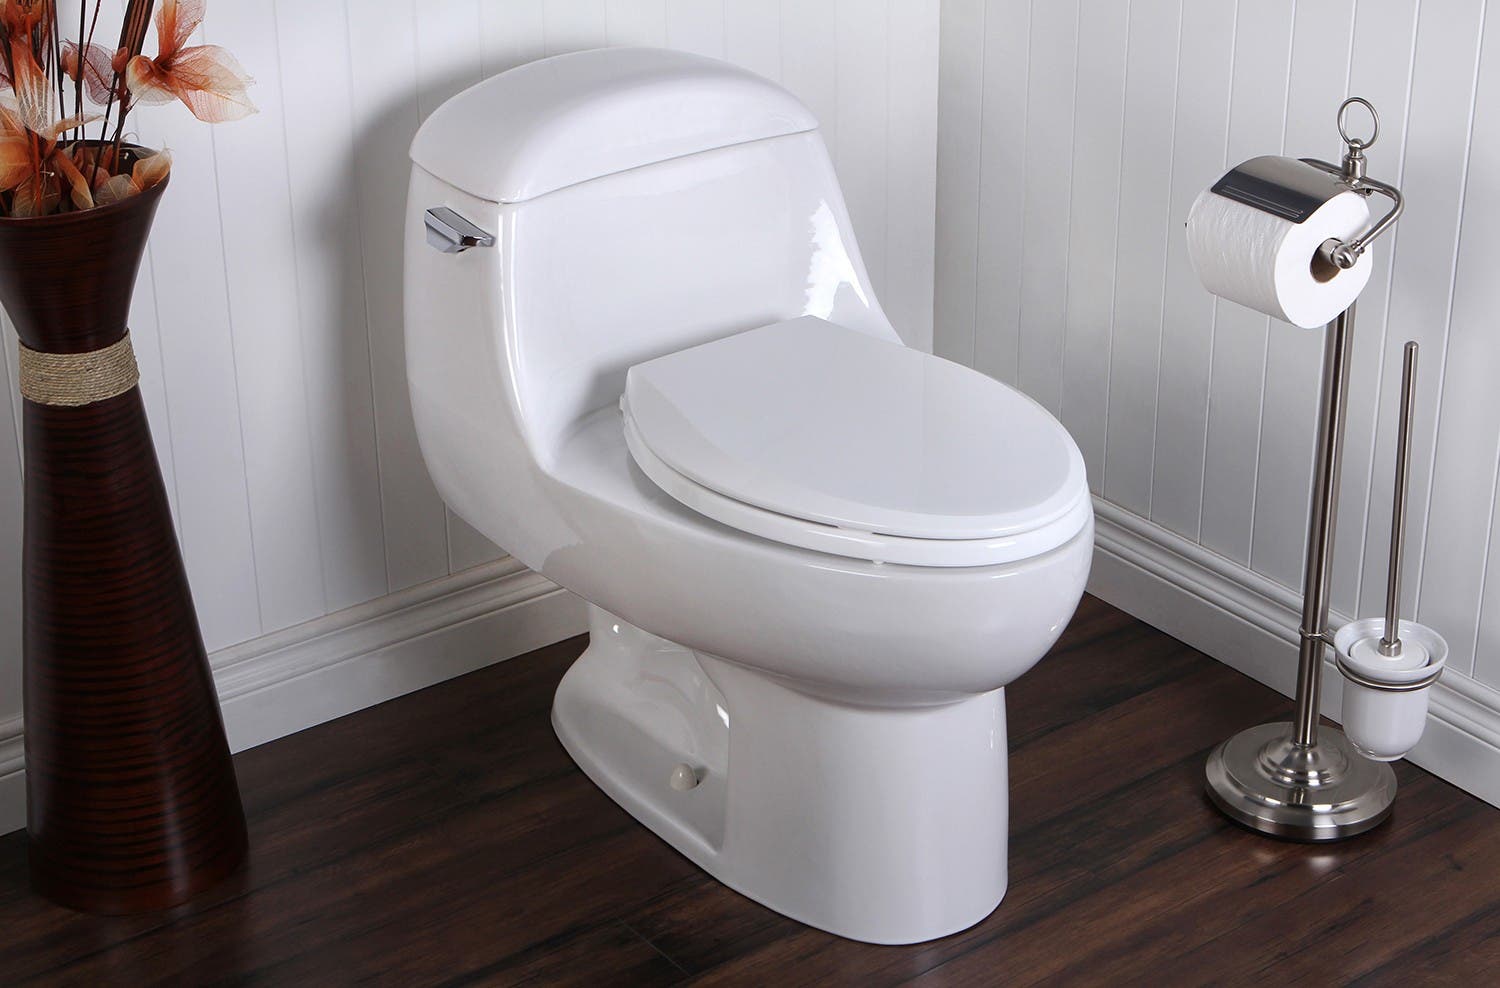 Easy Ways to Clean Toilets